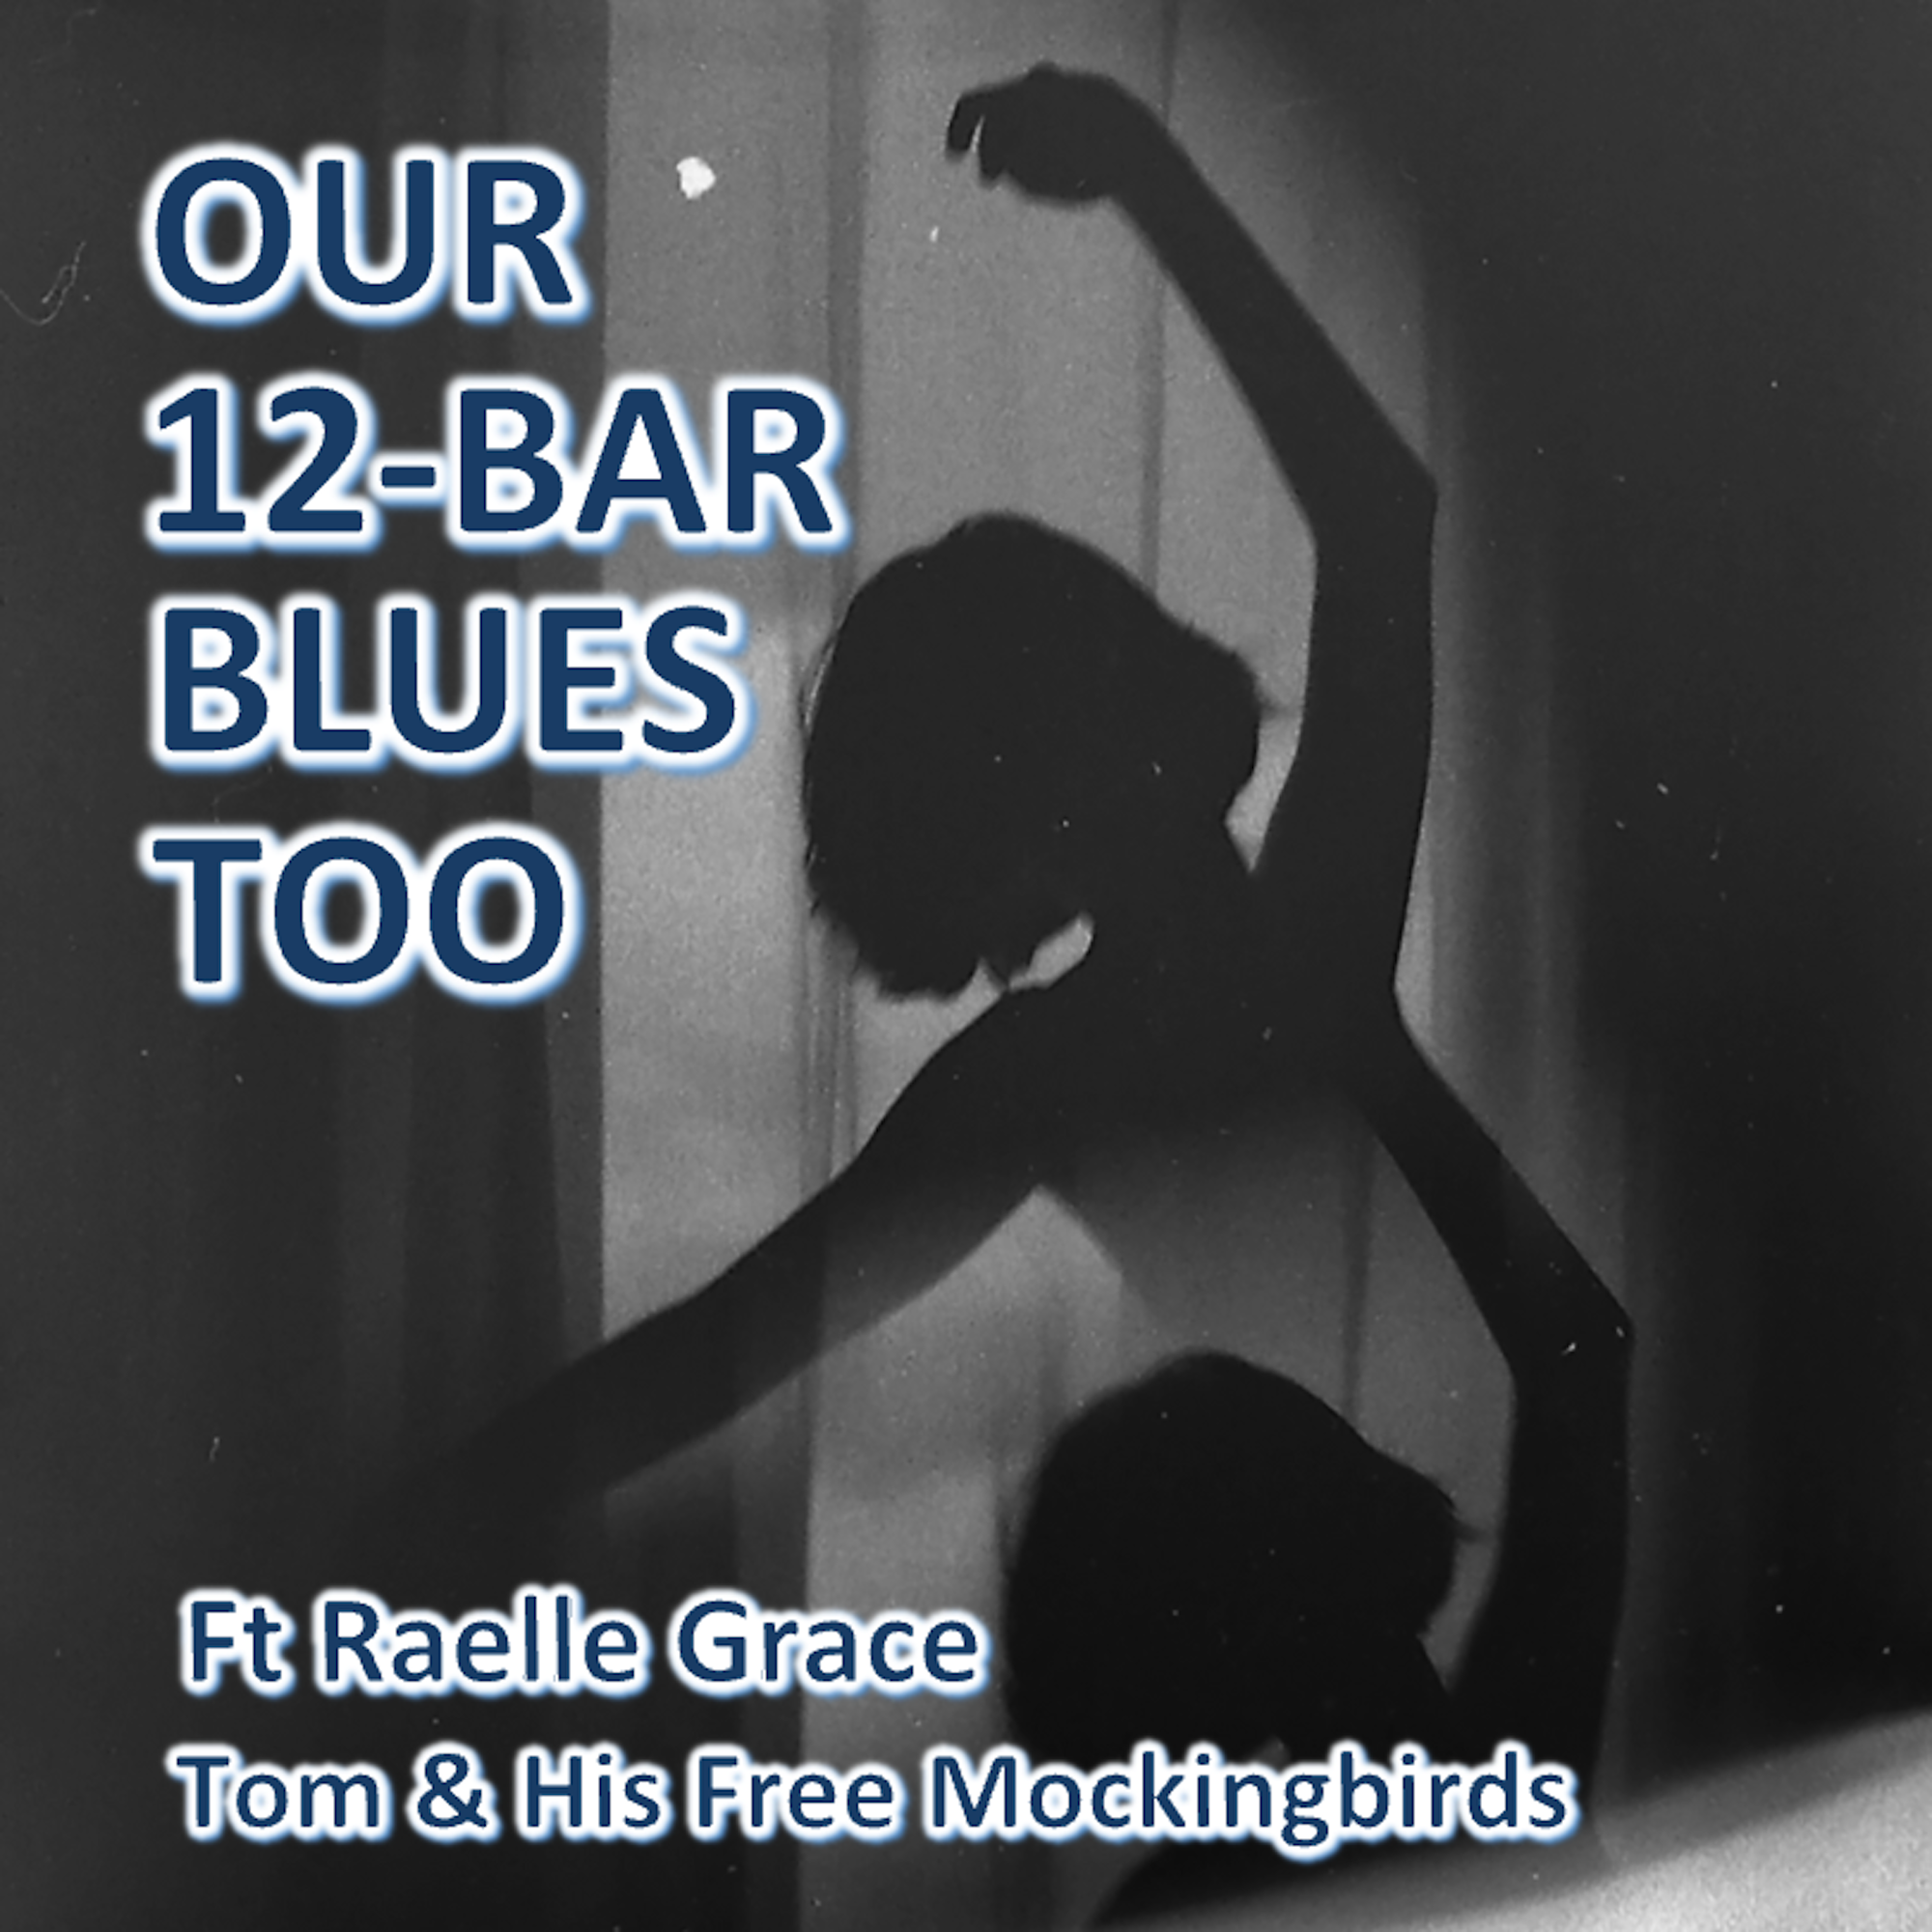 Melbourne’s Finest: ‘Tom & His Free Mockingbirds’ Hit the Airwaves with ‘Our 12-Bar Blues Too’